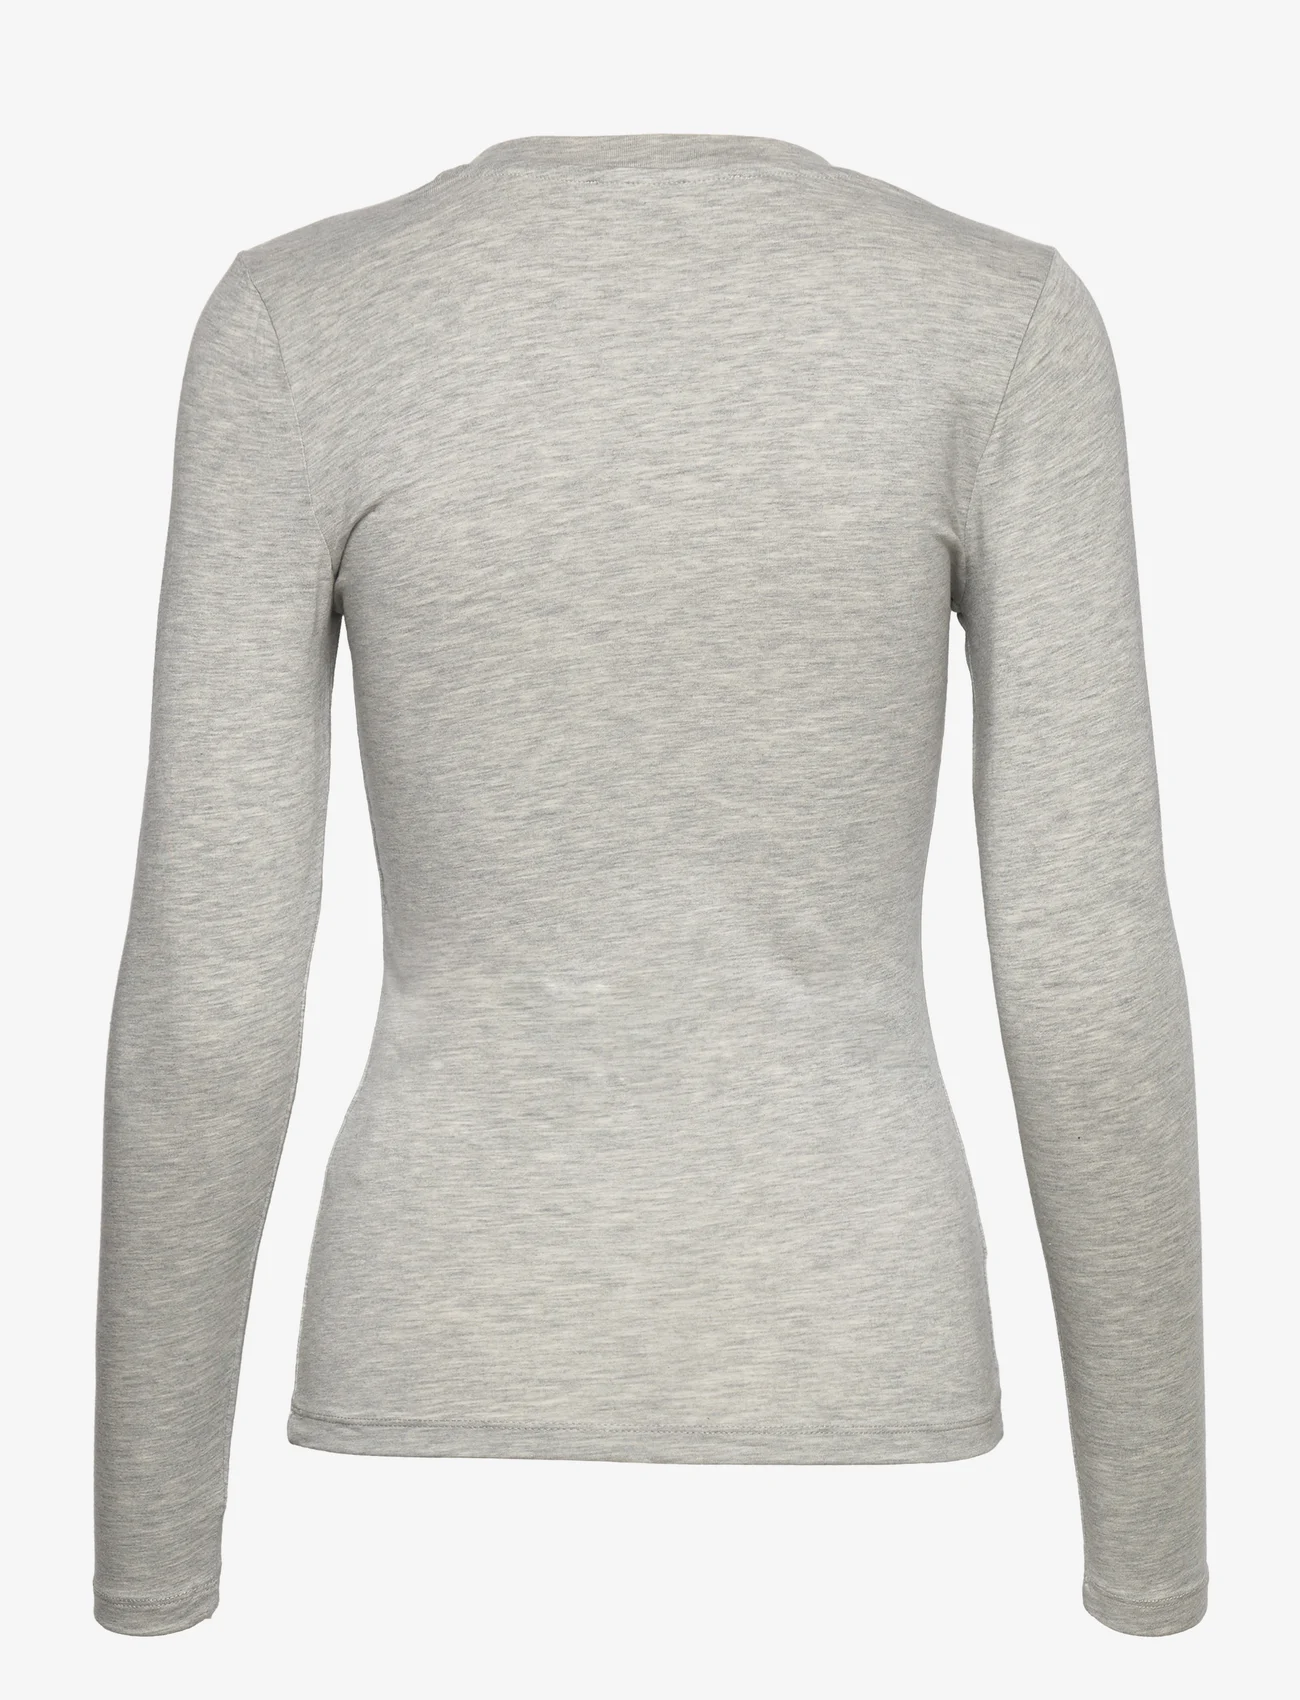 A-View - Stabil top l/s - long-sleeved tops - light grey melange - 1